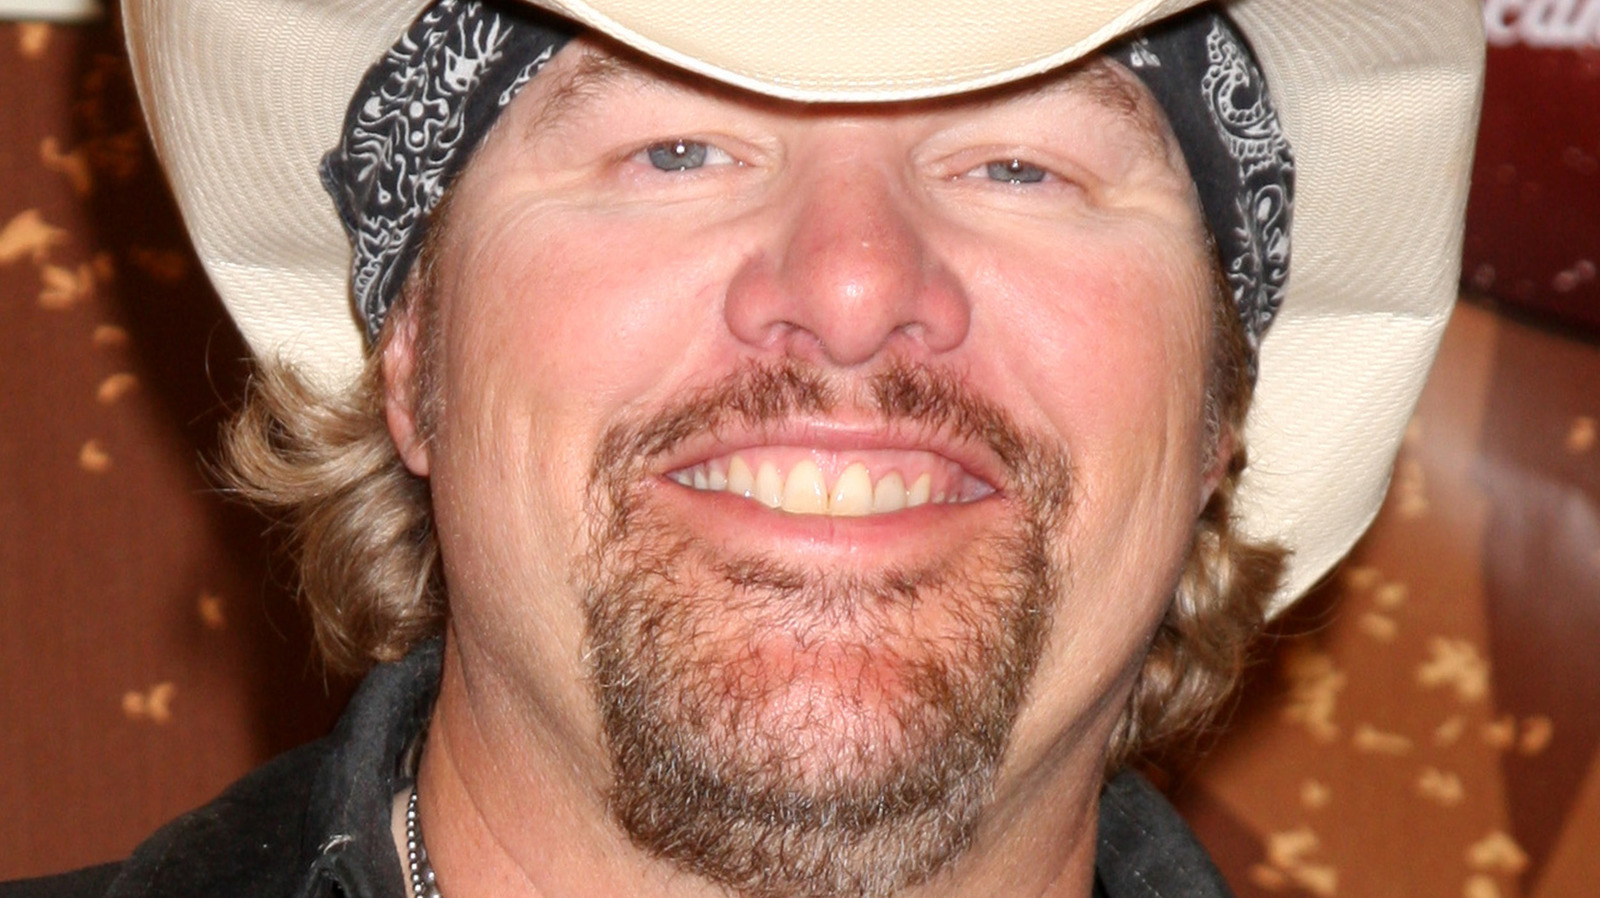 what is wrong with toby keith